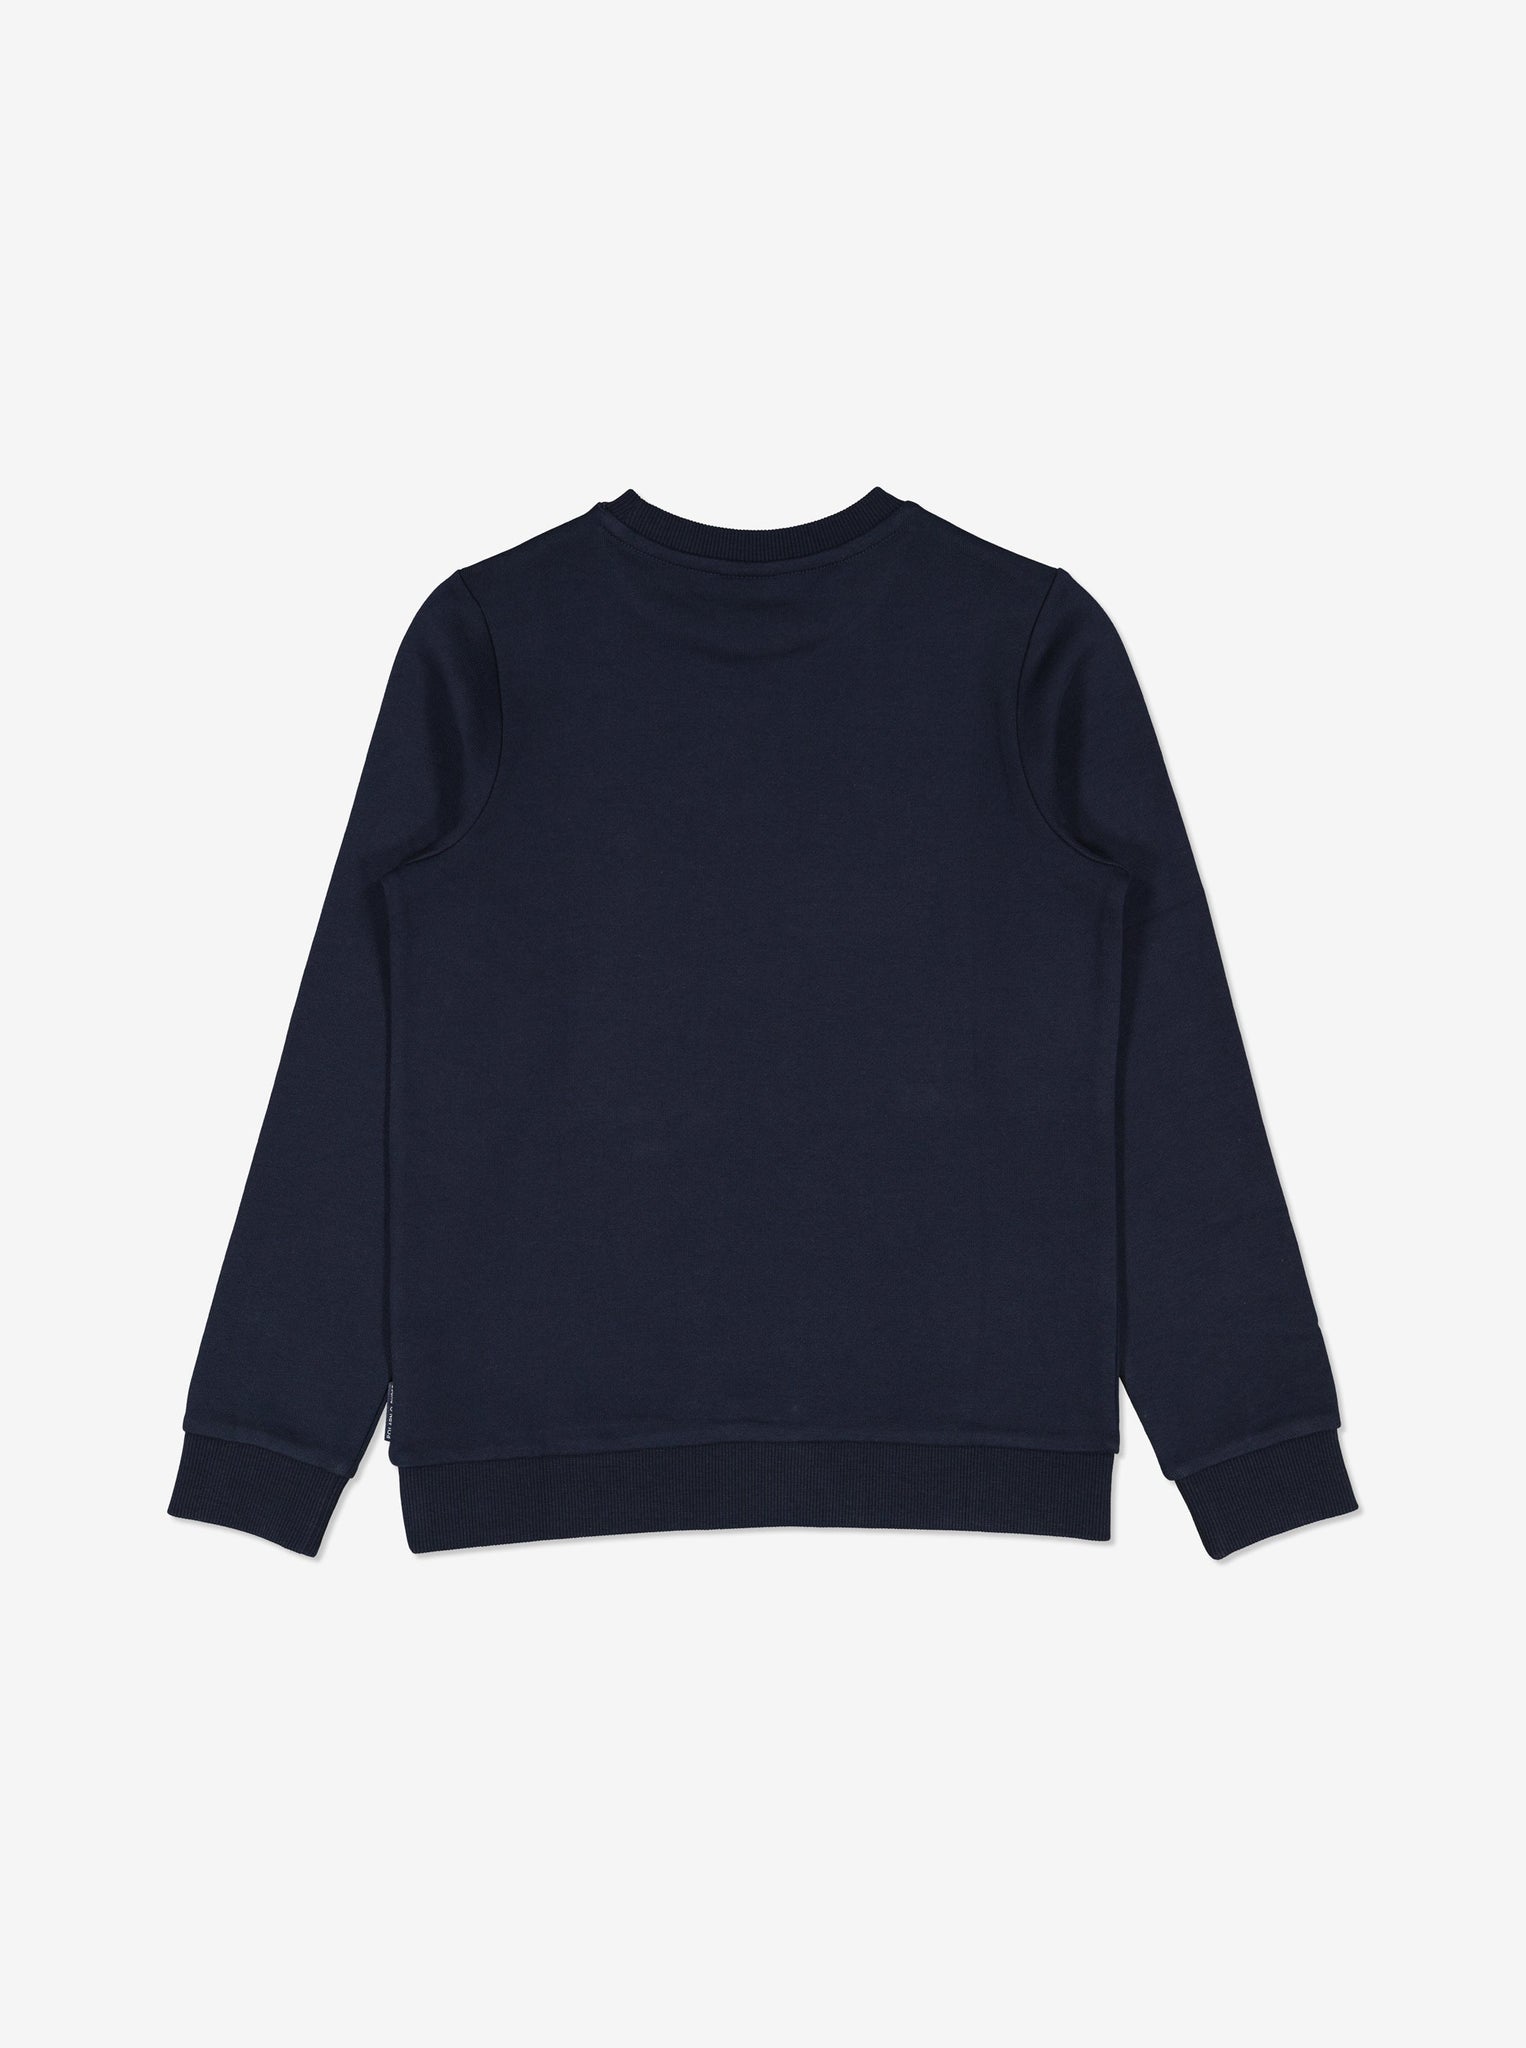  Navy Panther Print Kids Top from Polarn O. Pyret Kidswear. Made using sustainable materials.